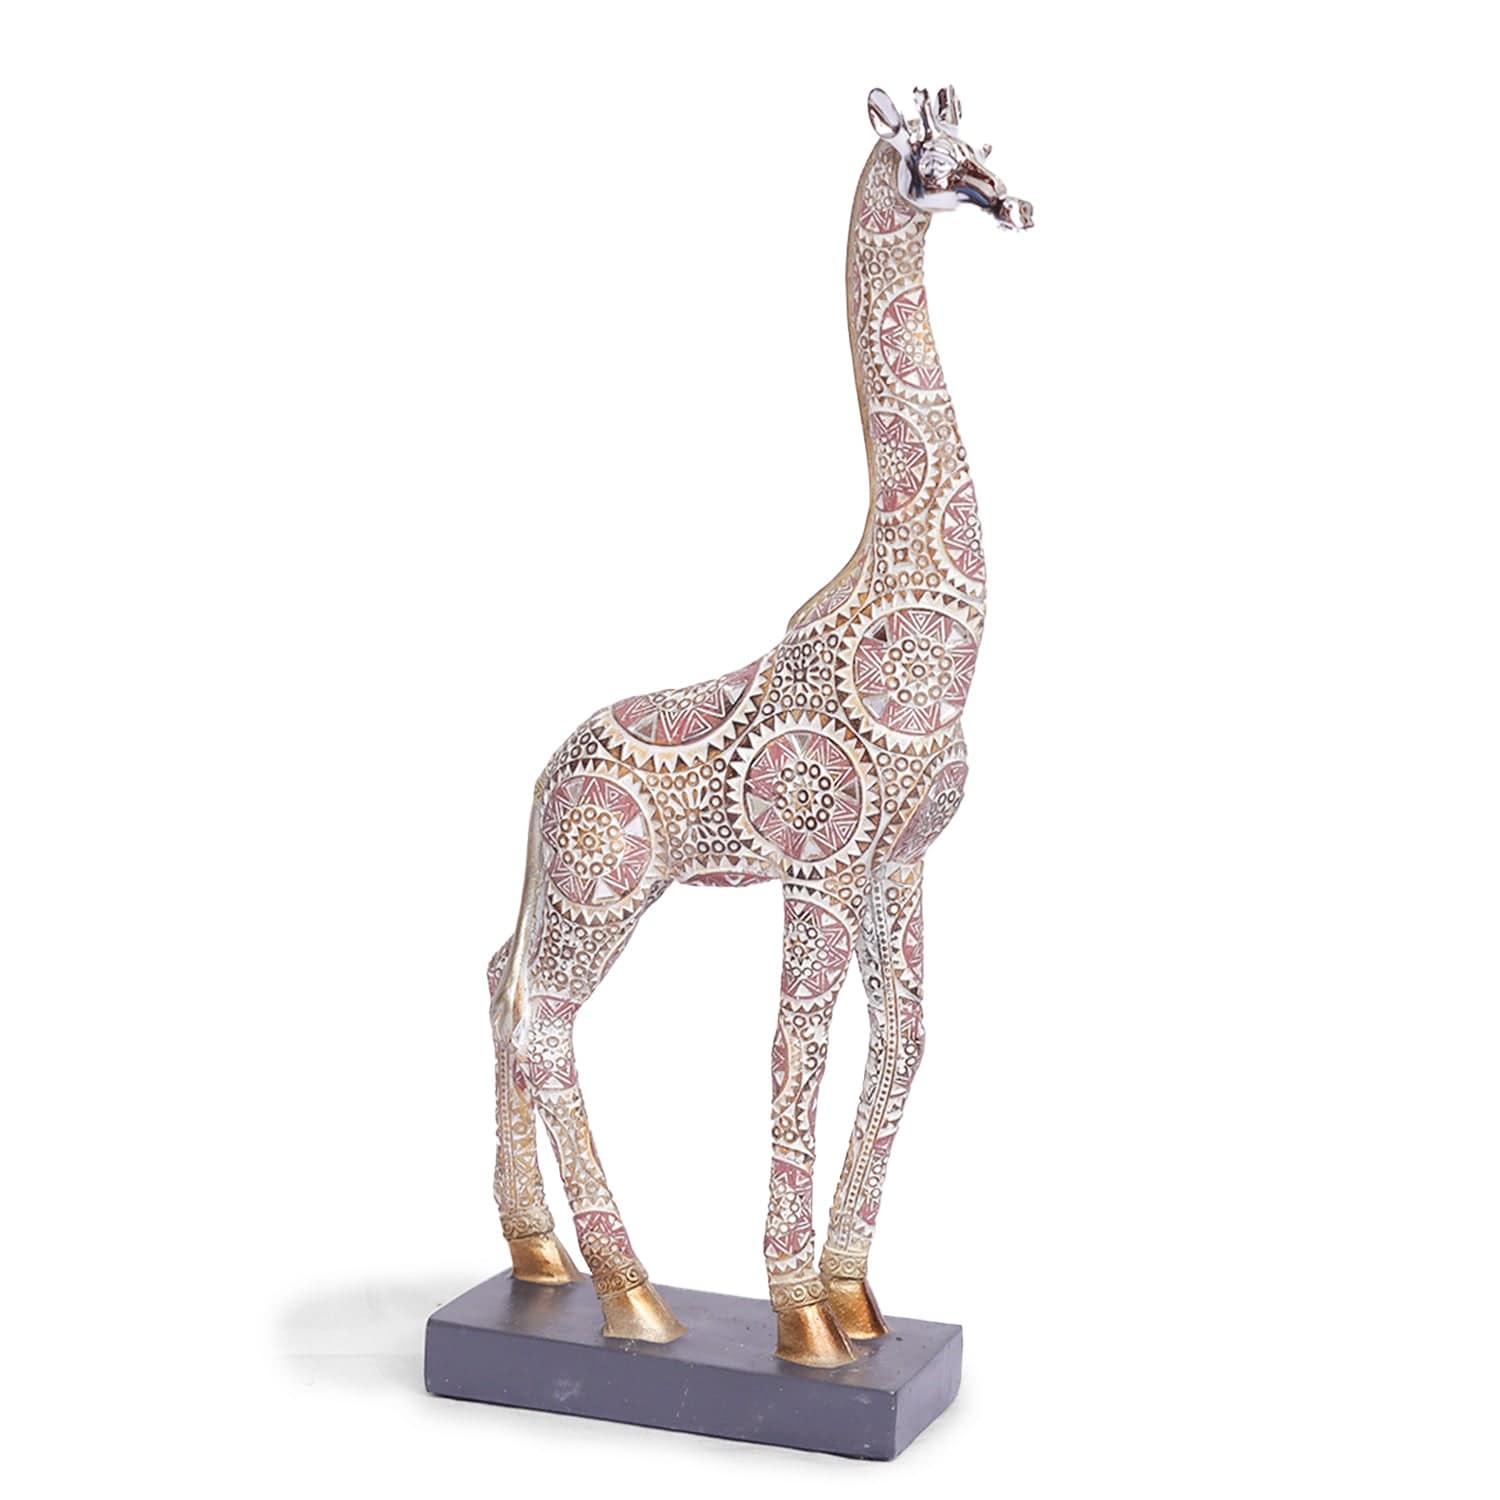 Red Butler Showpieces Decorative Giraffe ALPG00R13Y19A1 LPG13A1 Add Majestic Elegance to Your Space with Decorative Giraffe Figurine Redbutler